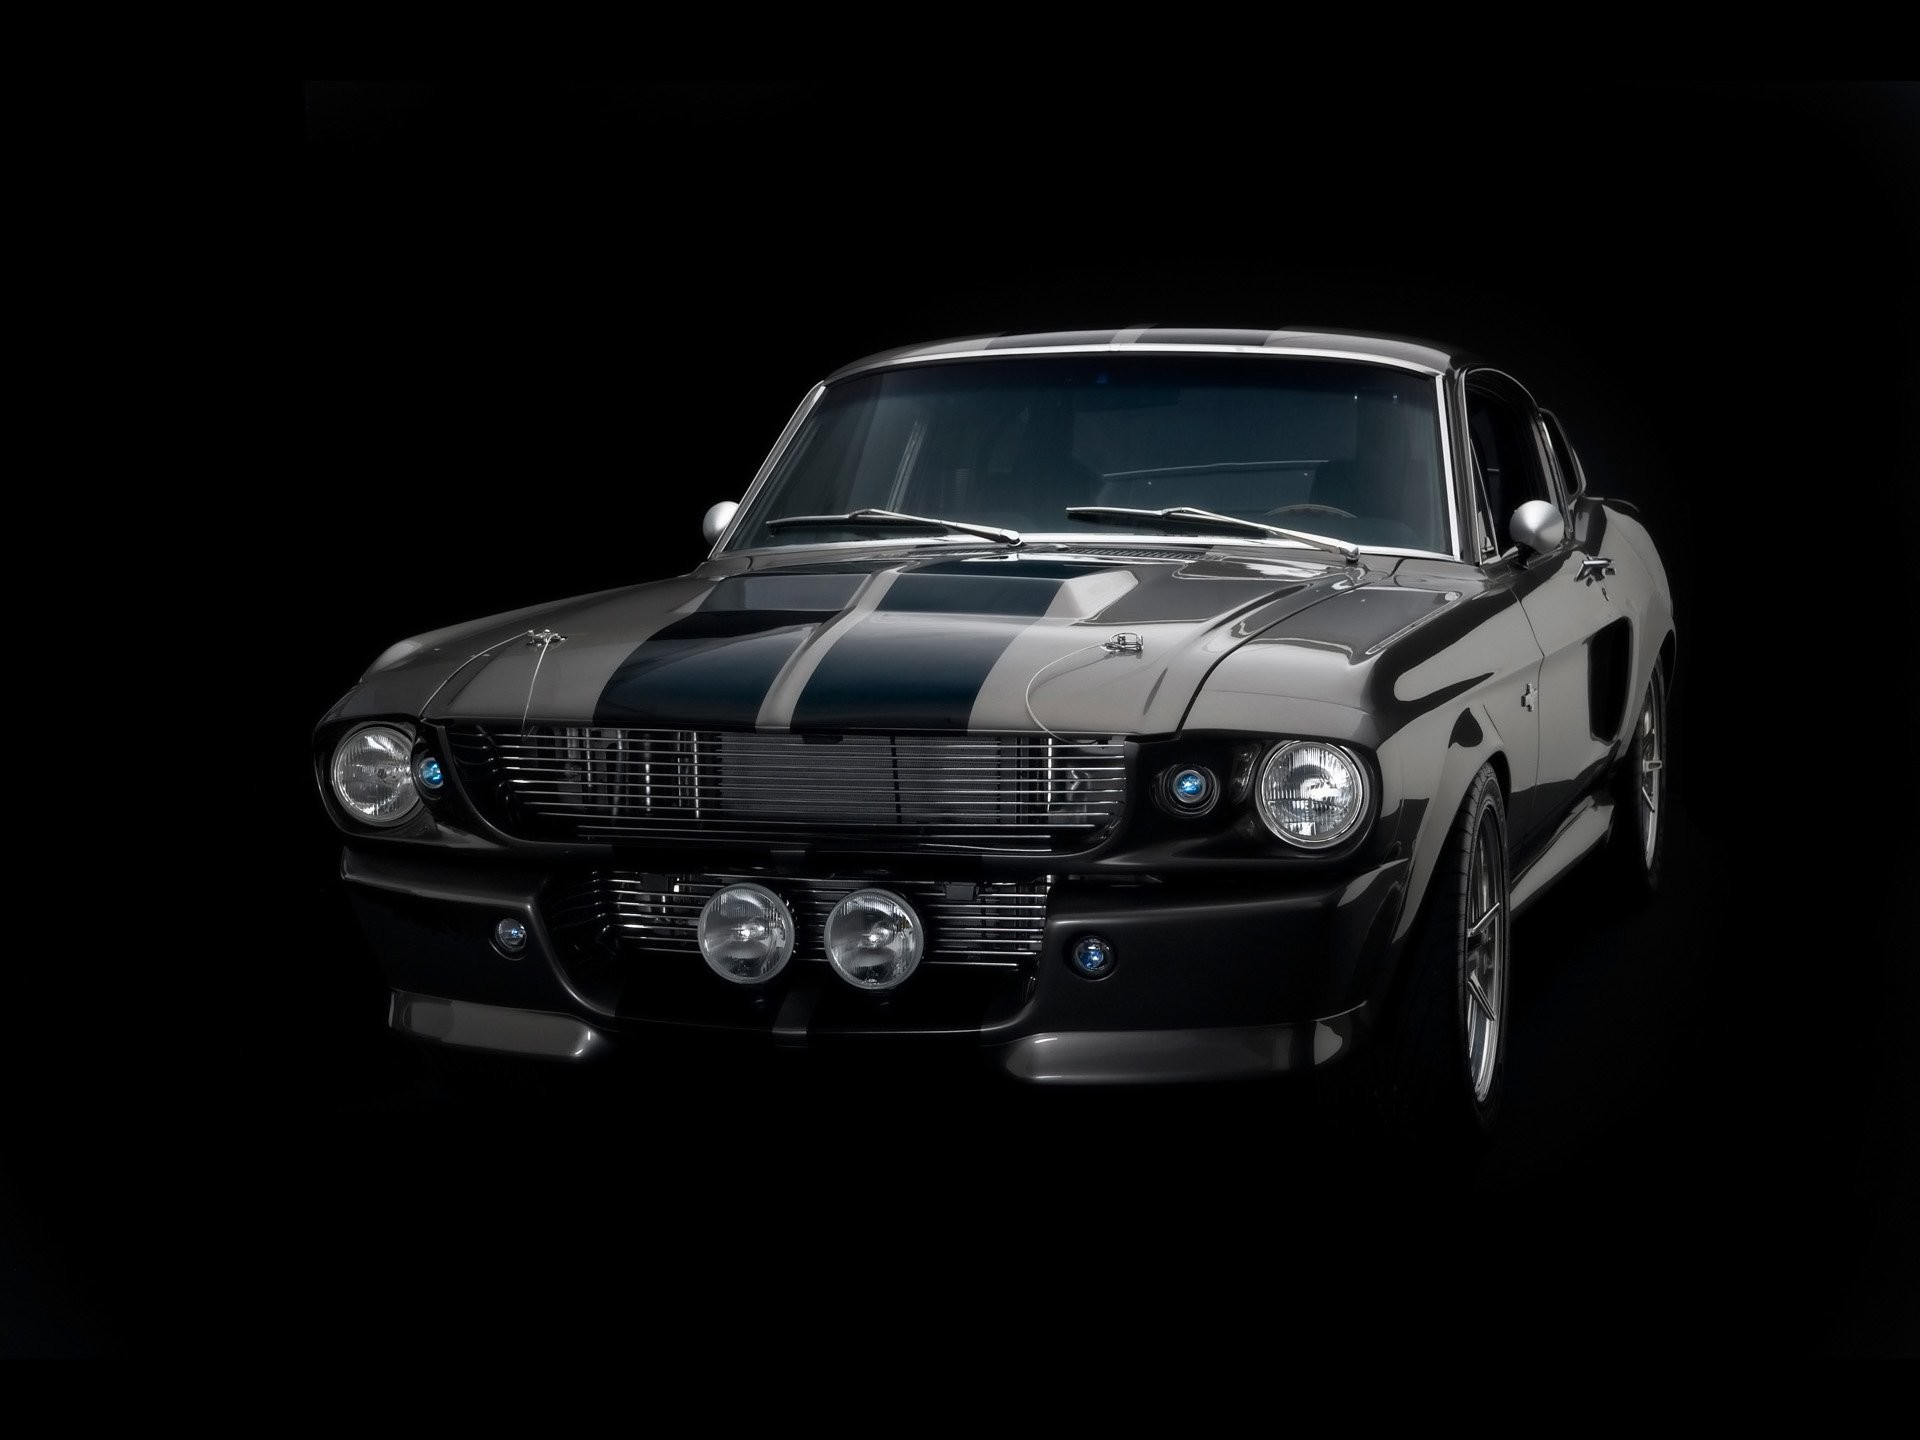 1920x1440 1967 Mustang Fastback Gone in 60 Seconds Eleanor Pictures, Photos,  Wallpapers.